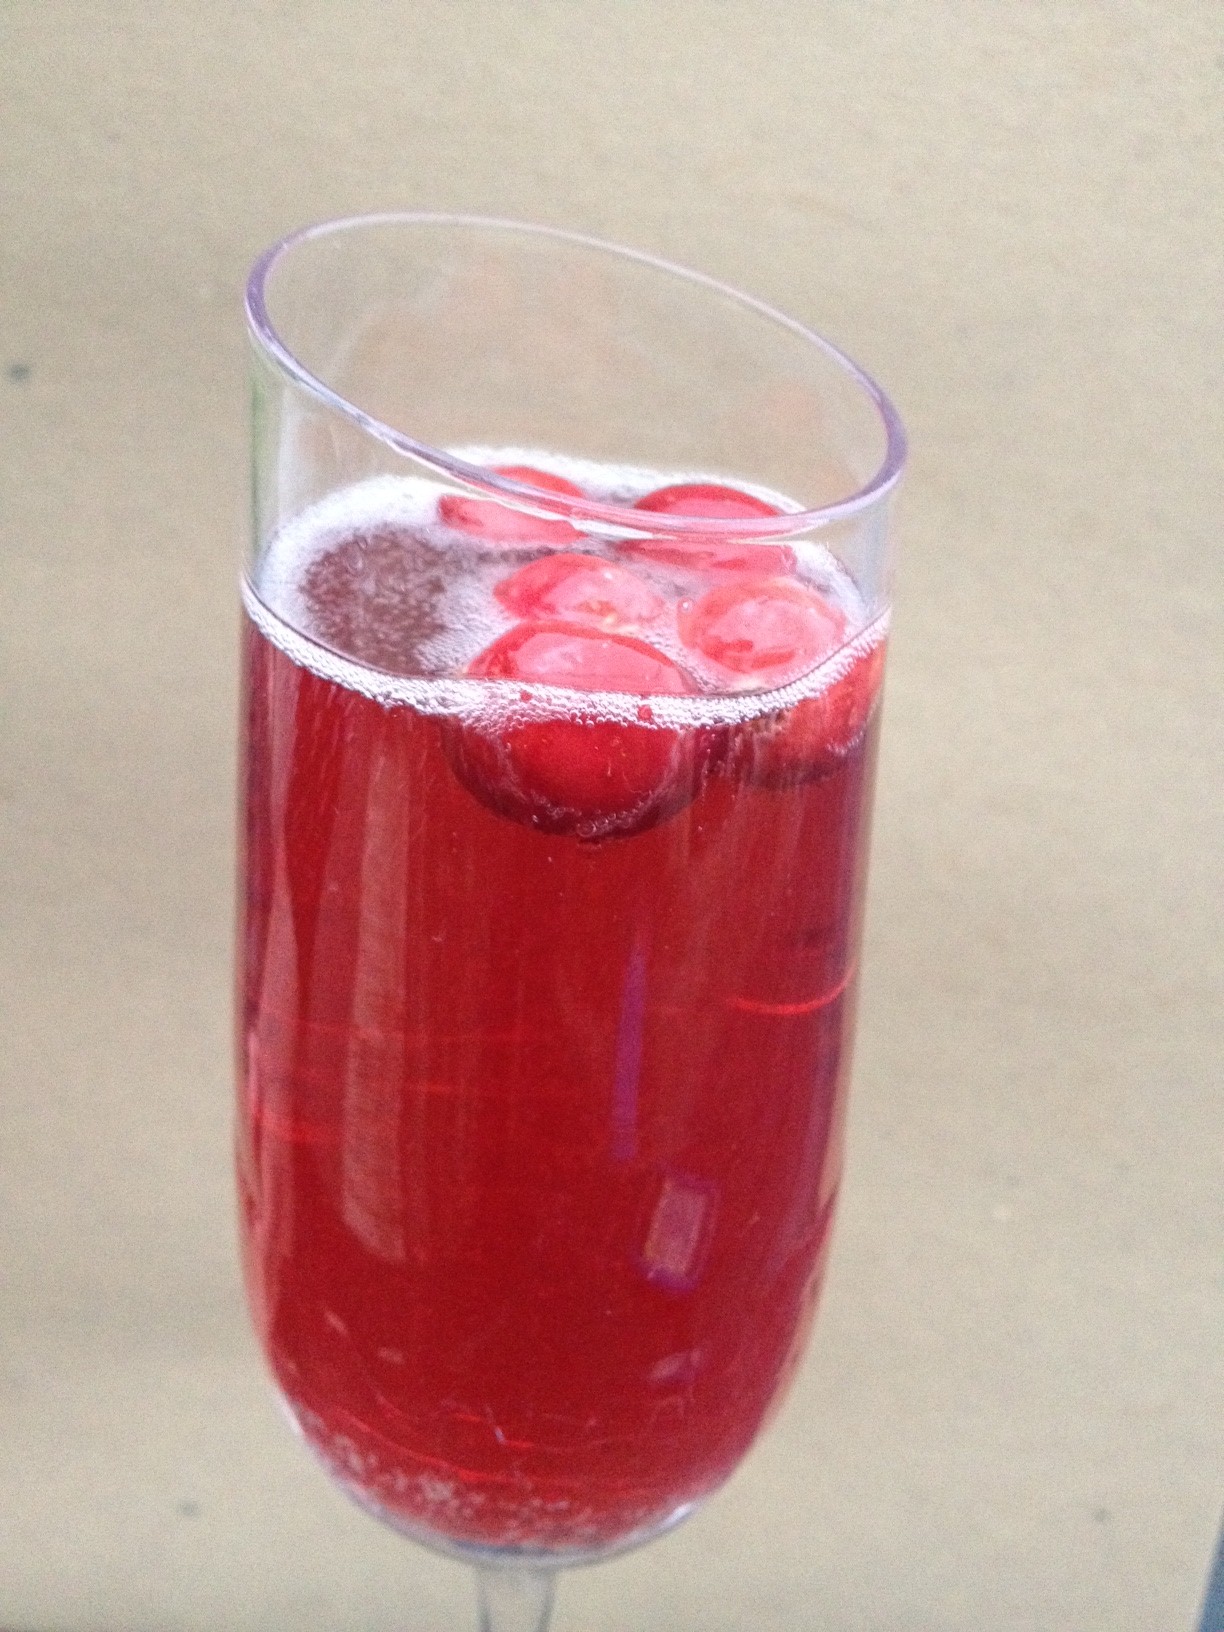 Cranberry Champagne Cocktail